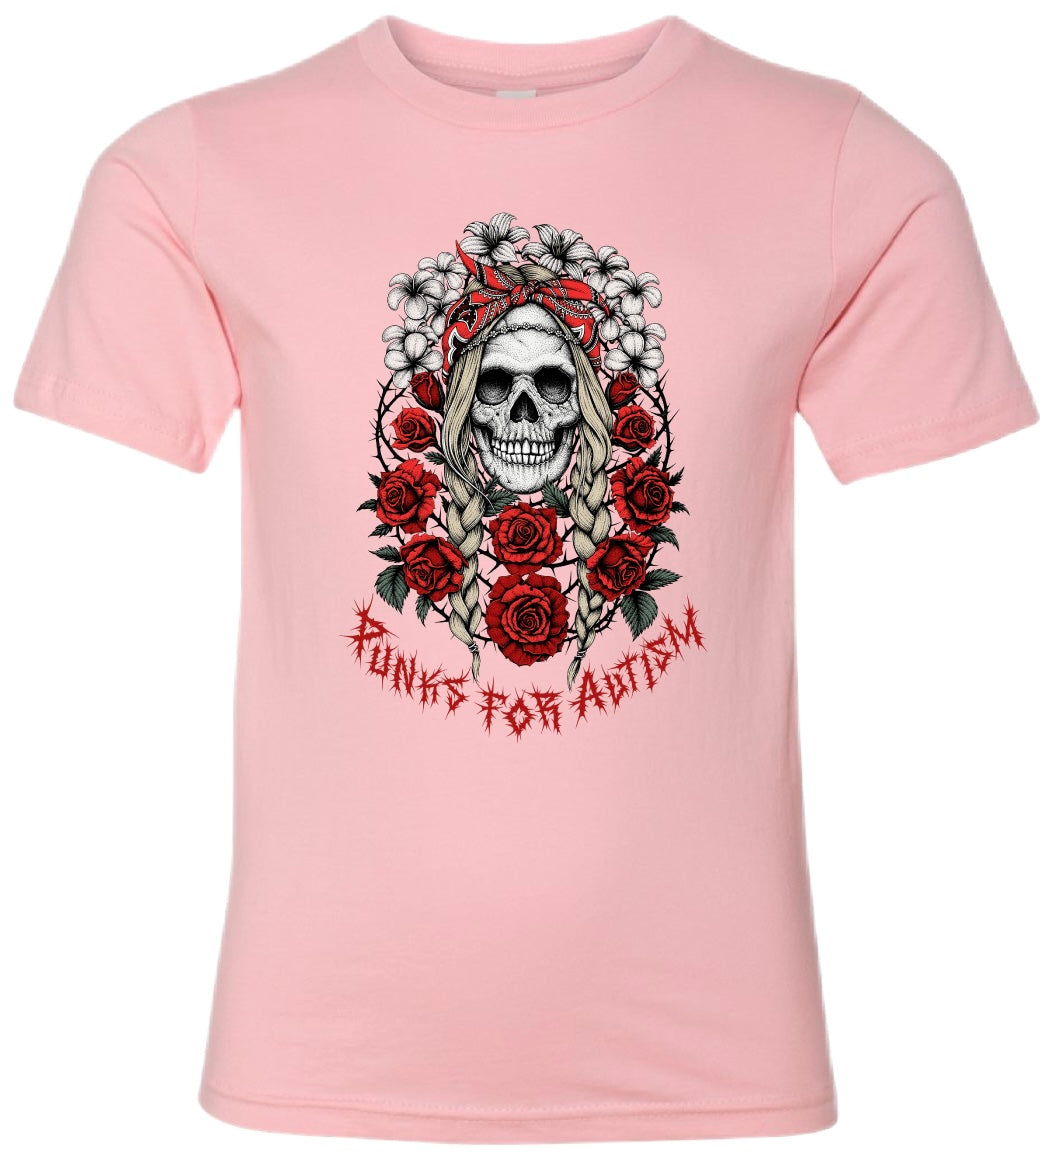 Punks for Autism - Roses - Short Sleeve